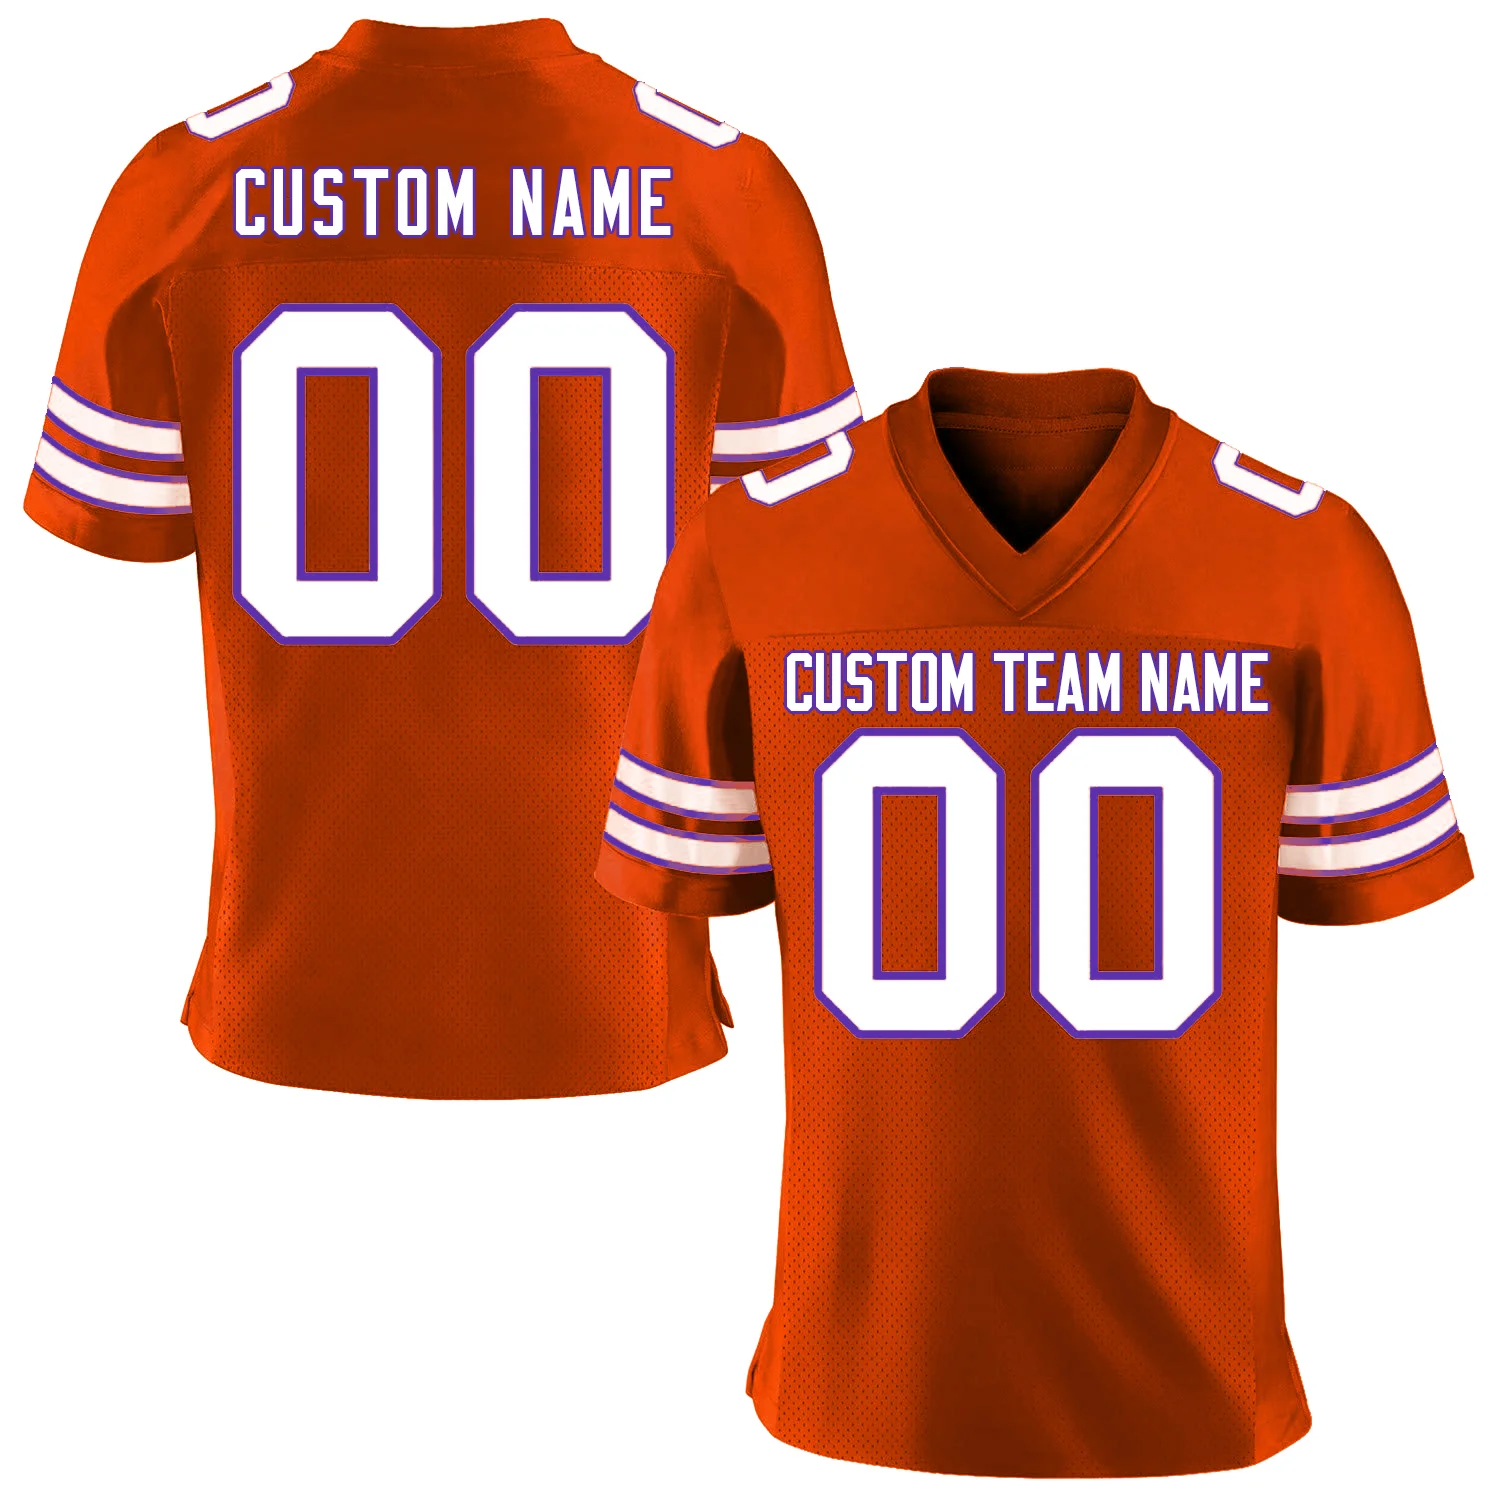 Source Custom design wholesale youth practice sublimation American football  jerseys uniform sets in low price on m.